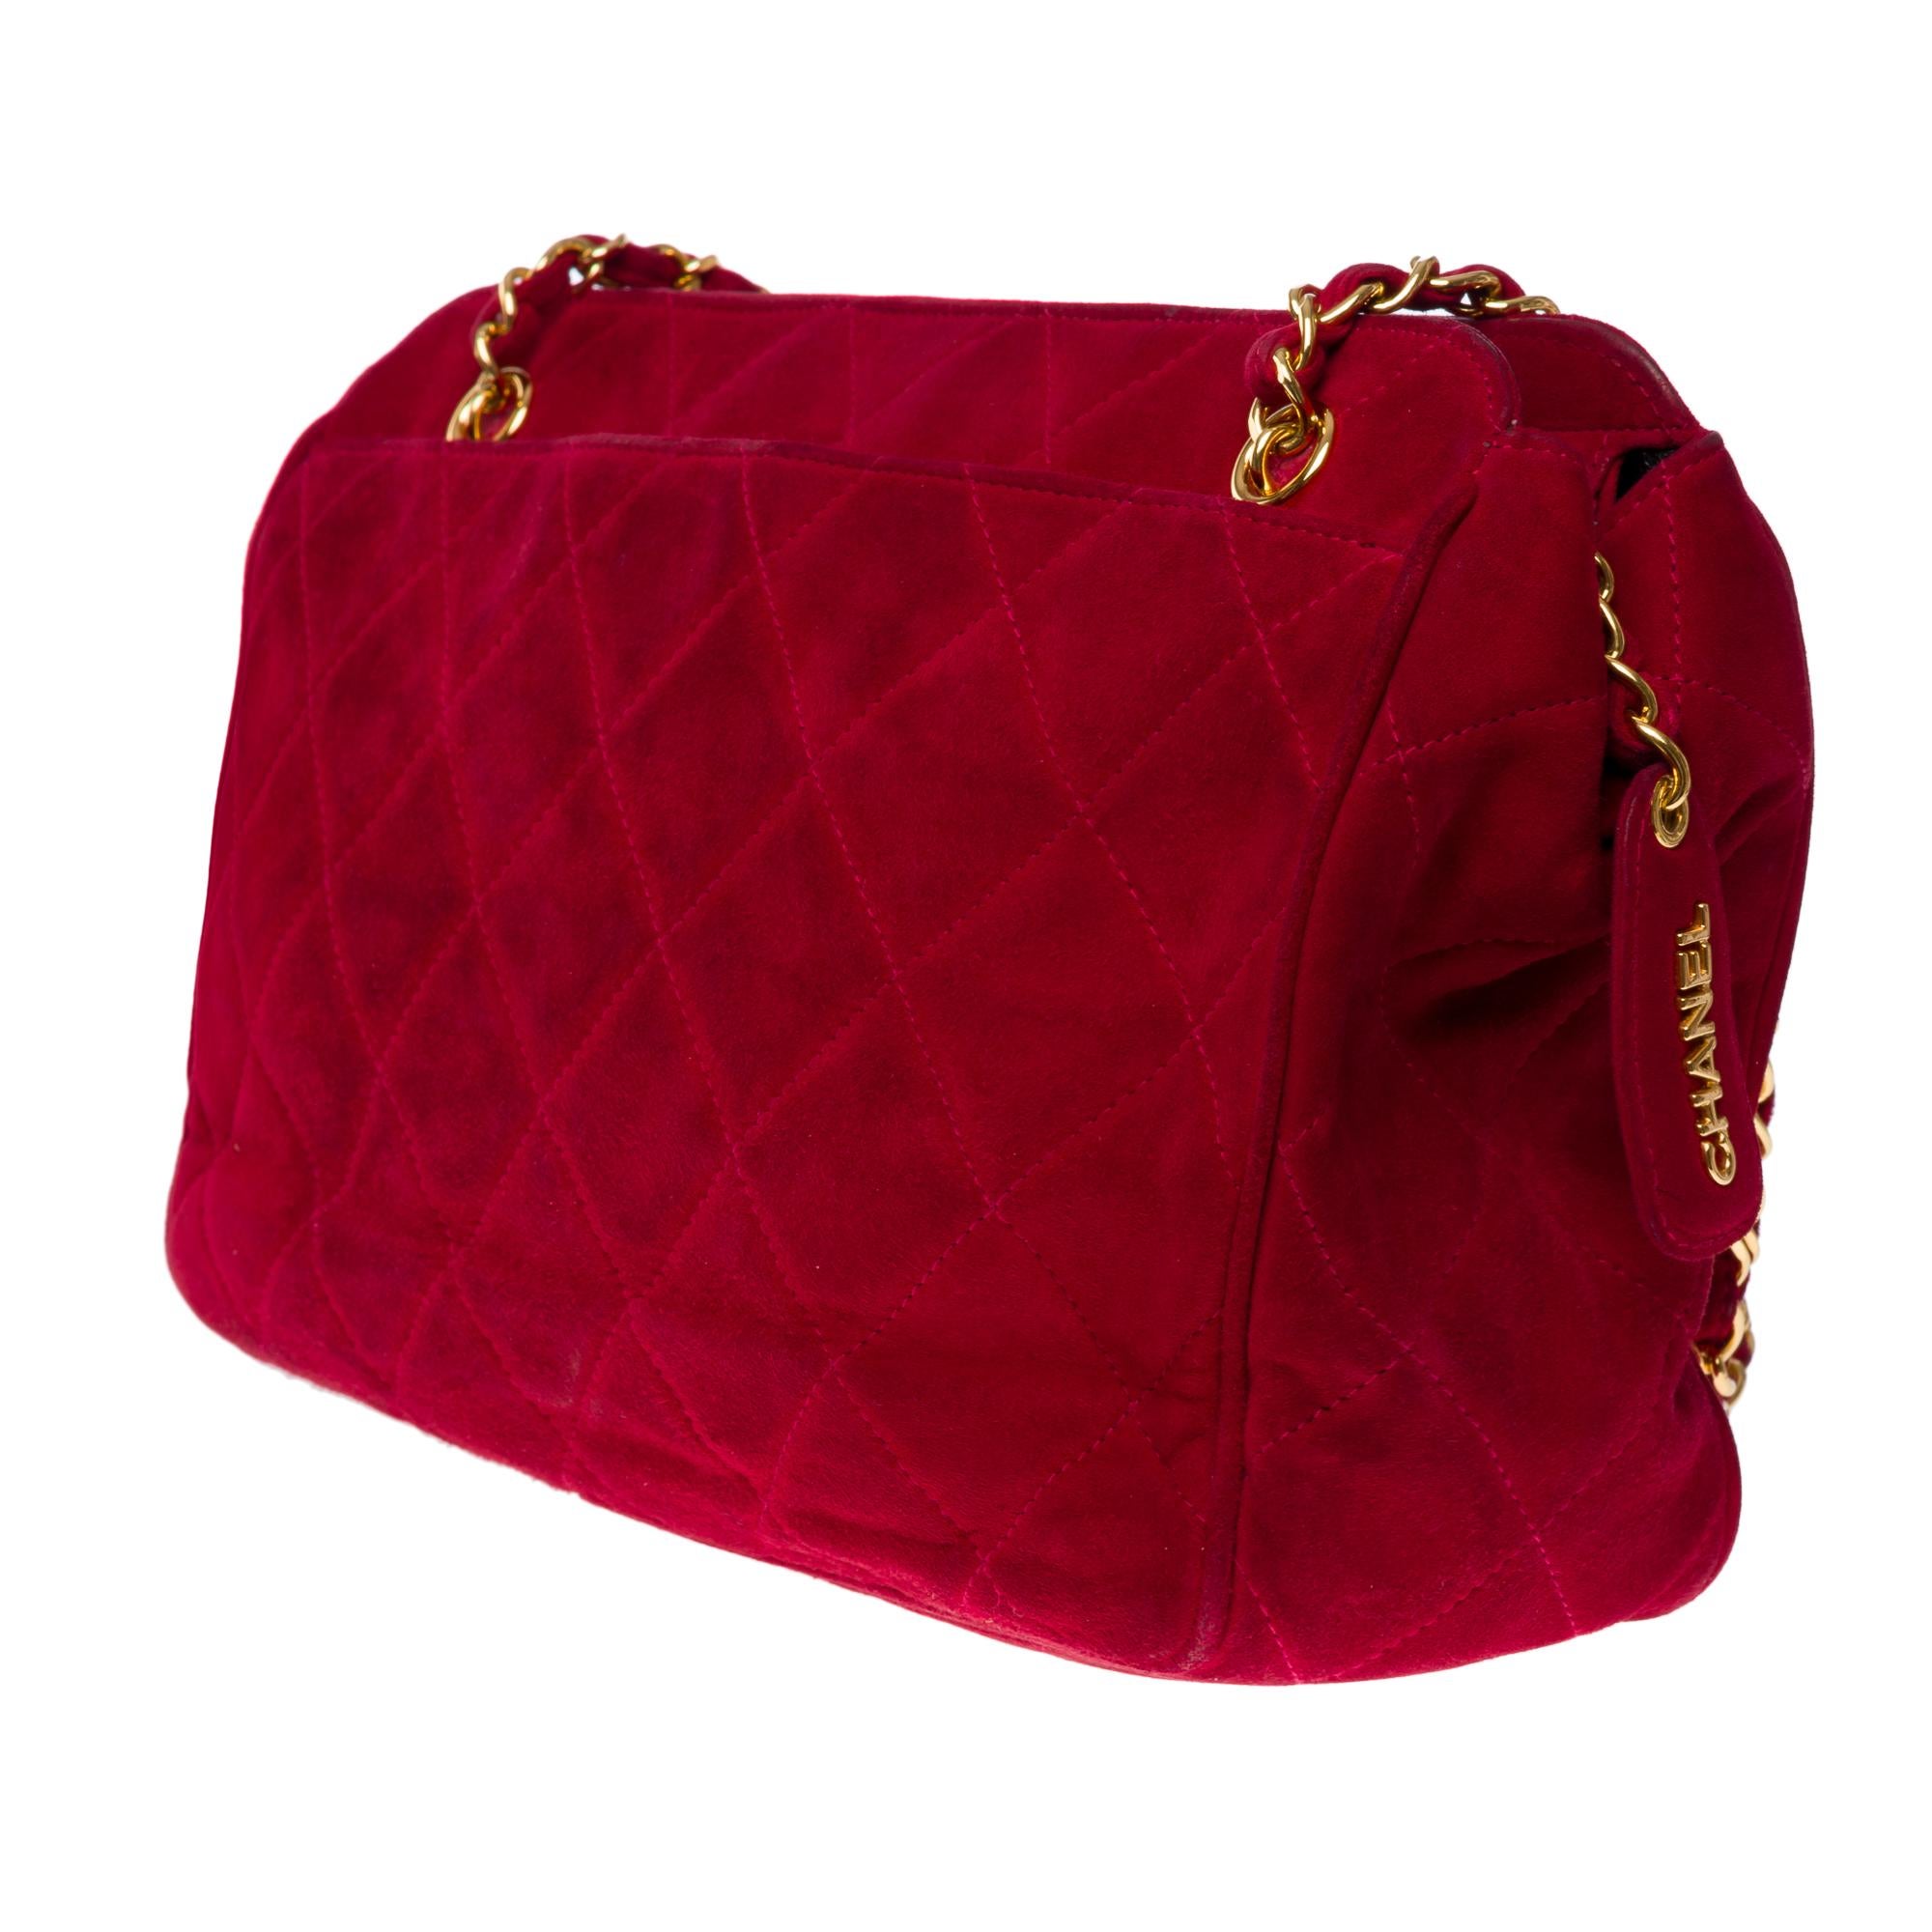 Women's Gorgeous Chanel Camera shoulder bag in red suede, GHW